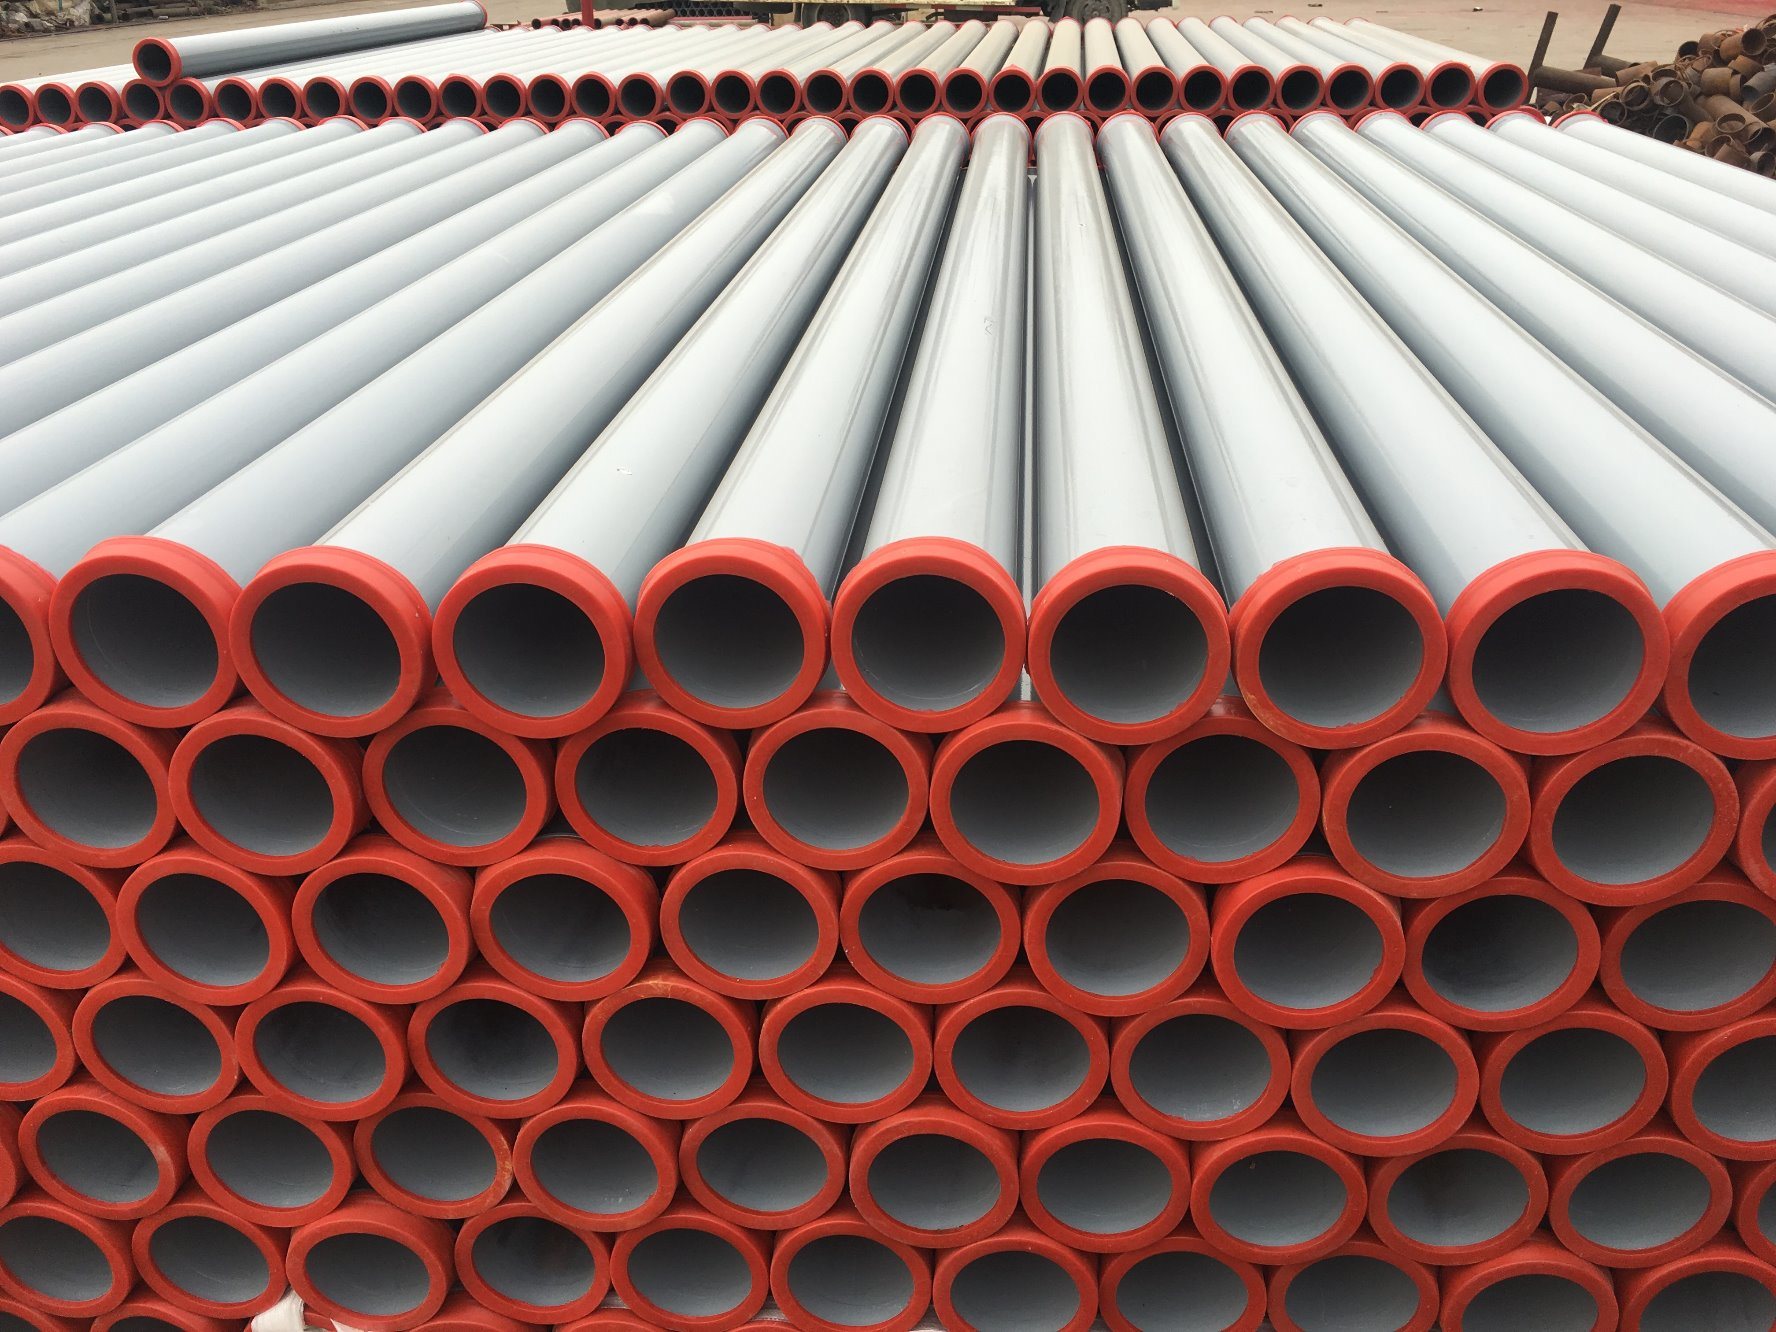 Concrete Pump Parts Single Wall Seamless Pipe Srtaight Pipe